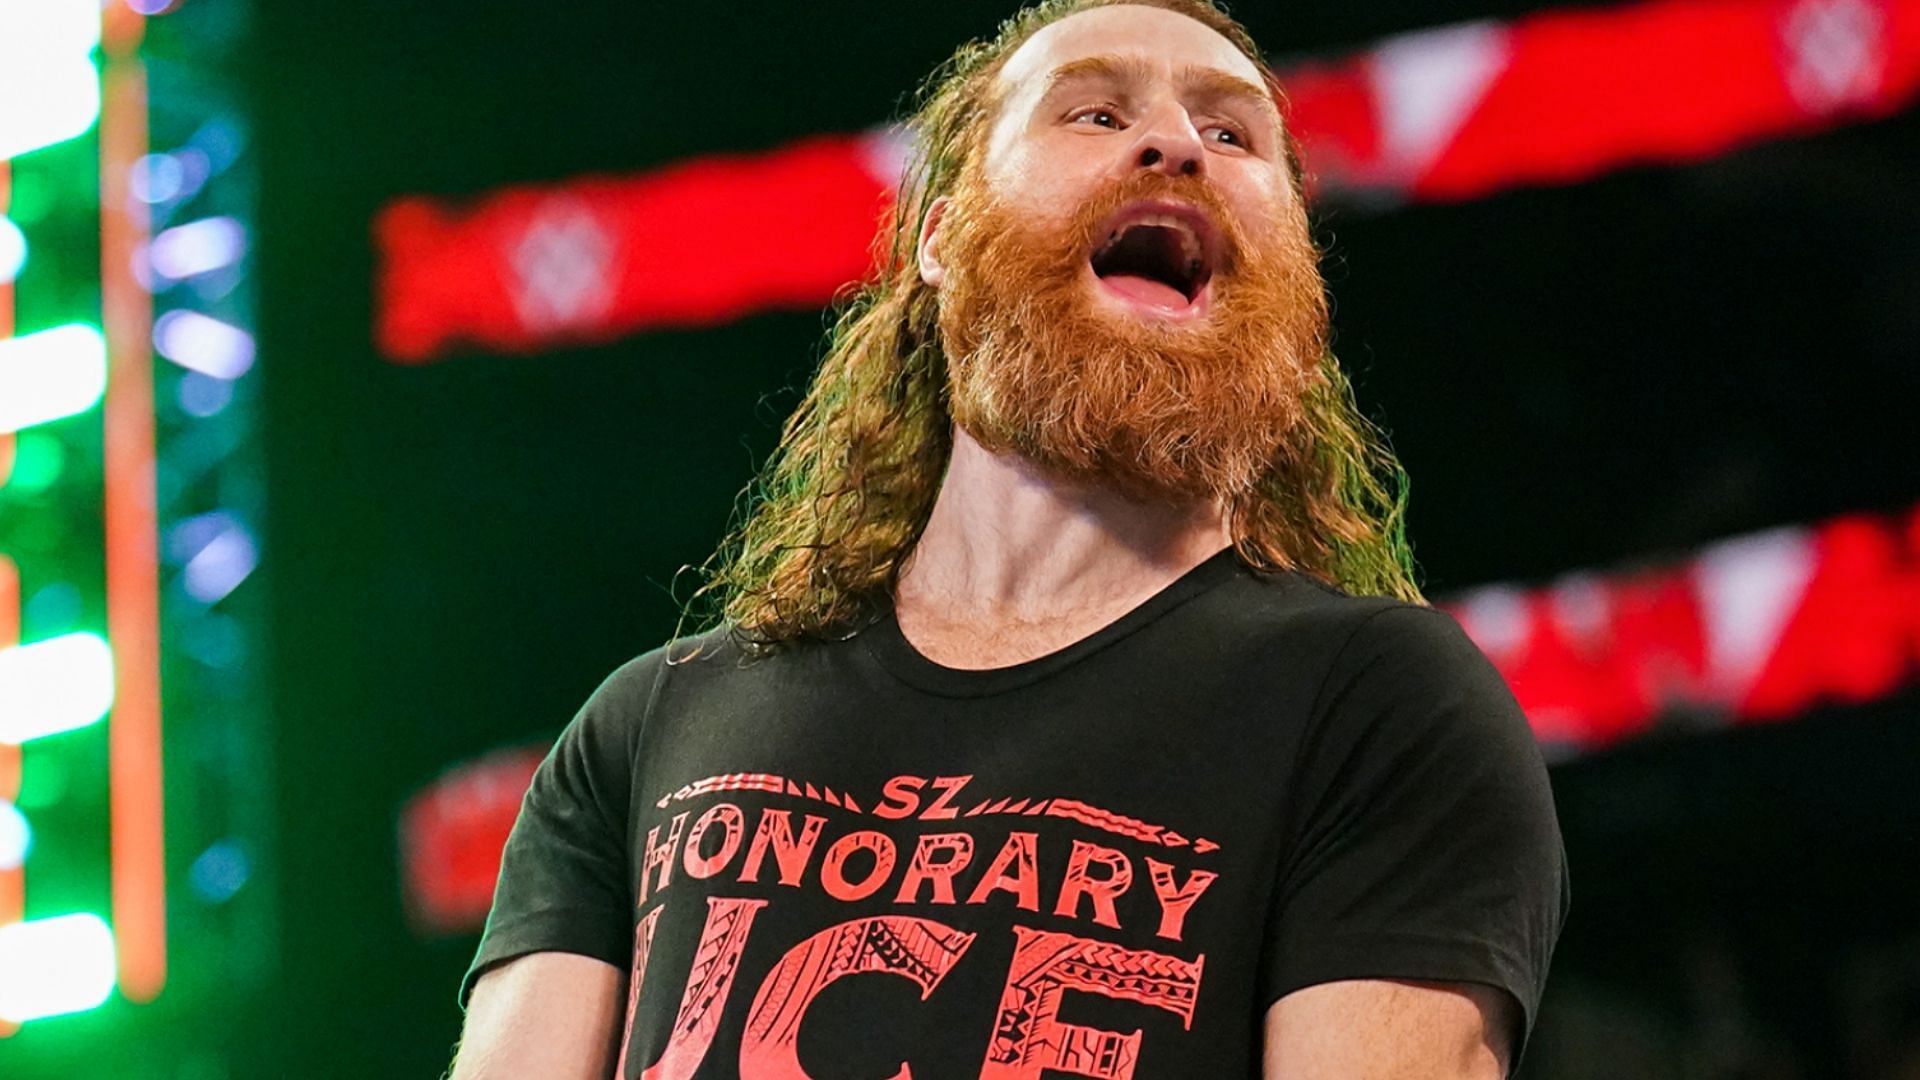 Sami Zayn is an Honorary Uce of The Bloodline in WWE.